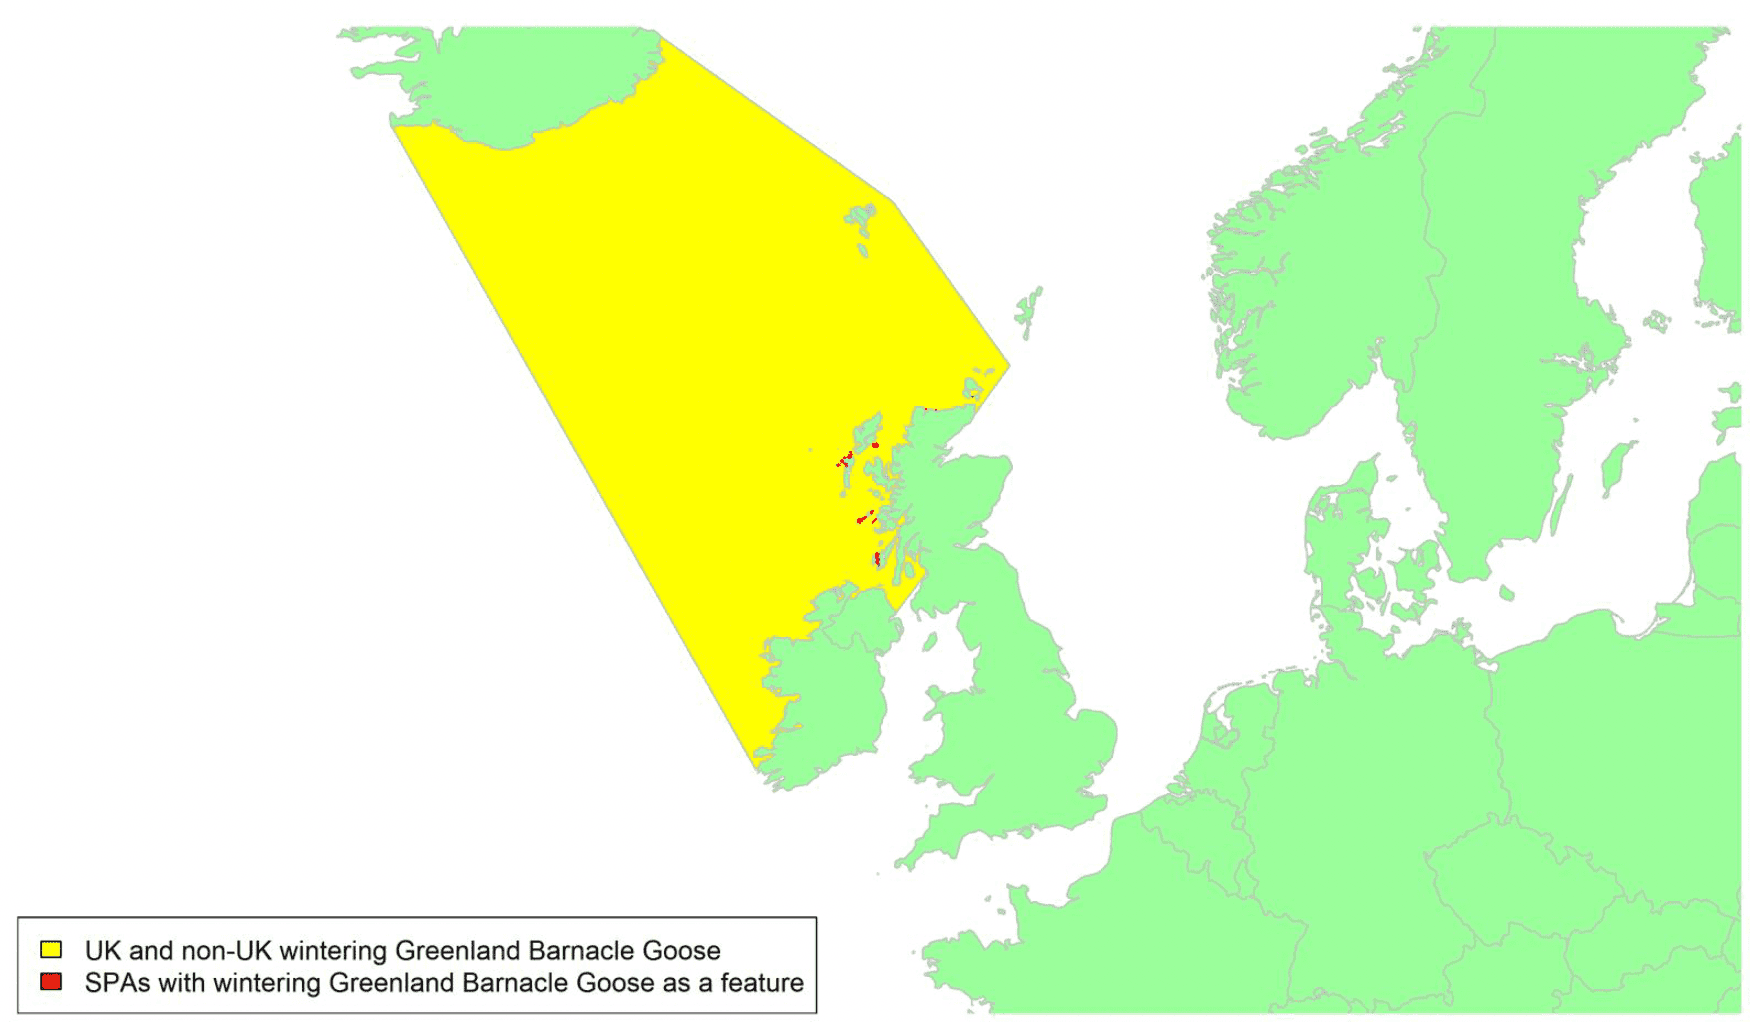 Map of North West Europe showing migratory routes and SPAs within the UK for ‘Greenland’ Barnacle Goose as described in the text below